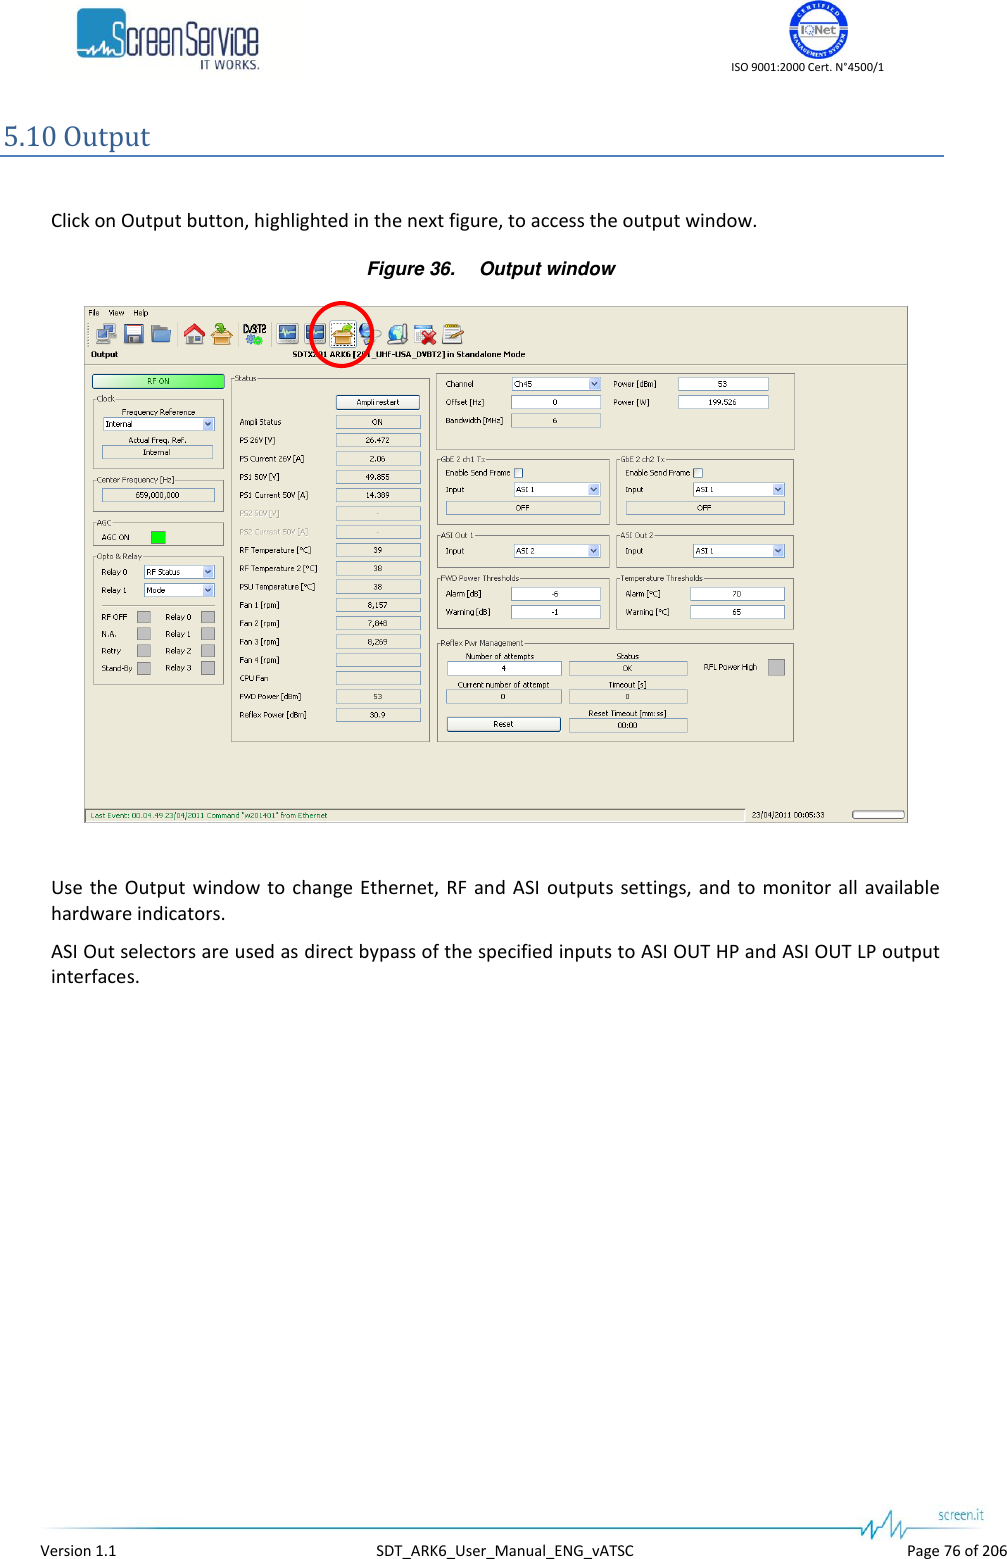    ISO 9001:2000 Cert. N°4500/1   Version 1.1  SDT_ARK6_User_Manual_ENG_vATSC  Page 76 of 206 5.10 Output  Click on Output button, highlighted in the next figure, to access the output window. Figure 36. Output window   Use the Output  window to change  Ethernet,  RF and  ASI  outputs  settings,  and to monitor  all available hardware indicators.  ASI Out selectors are used as direct bypass of the specified inputs to ASI OUT HP and ASI OUT LP output interfaces. 